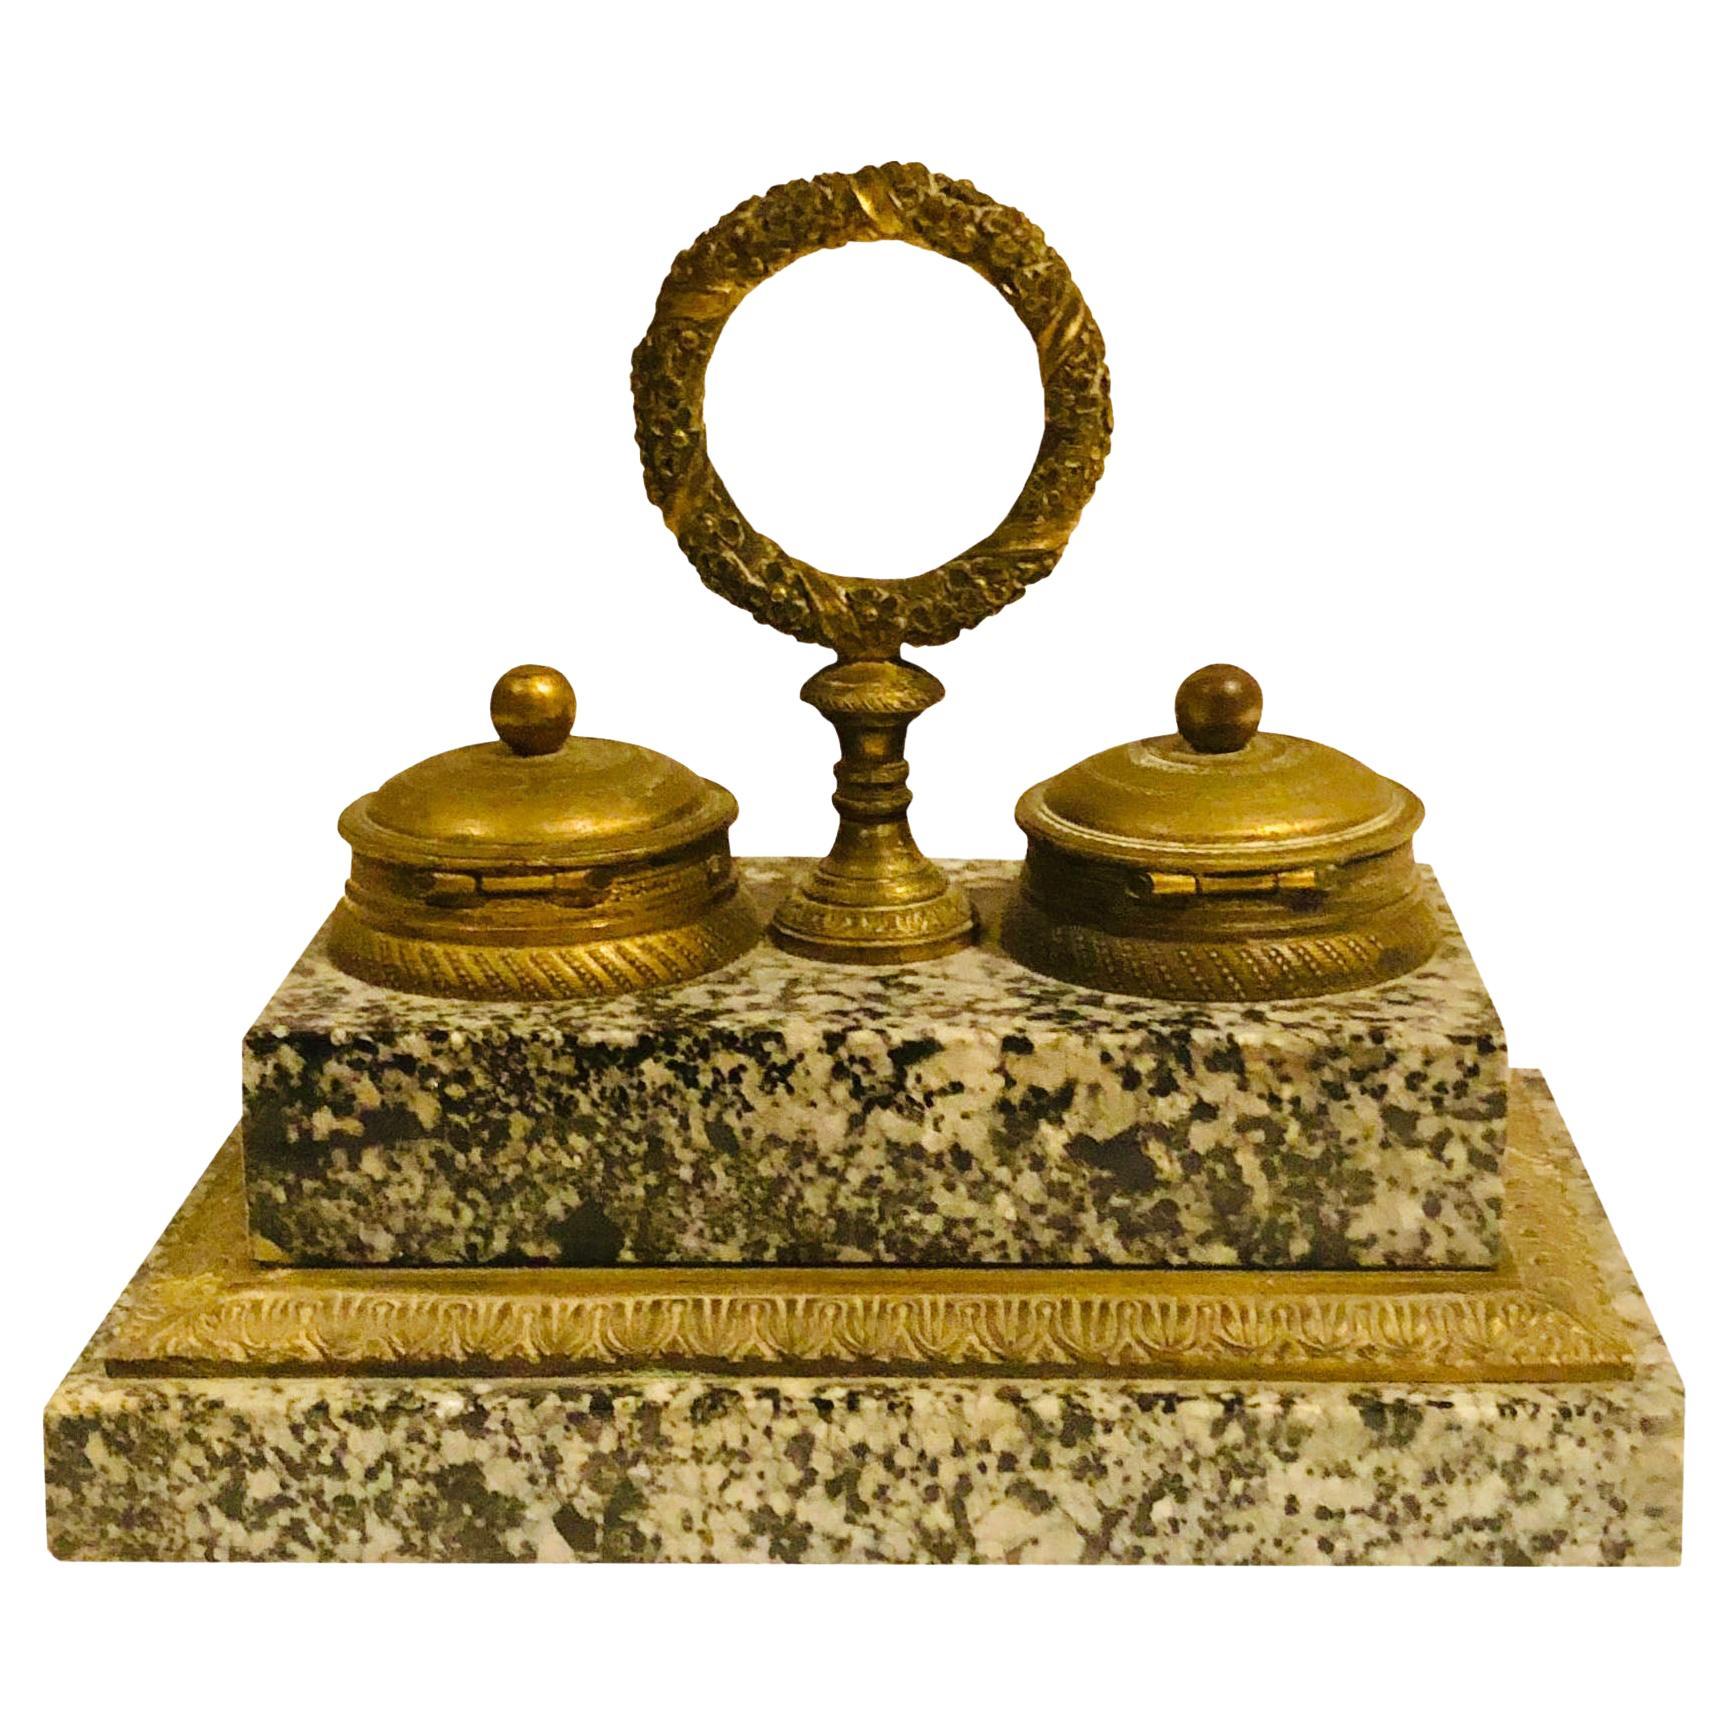 19th Century French Doré Bronze and Marble Inkwell